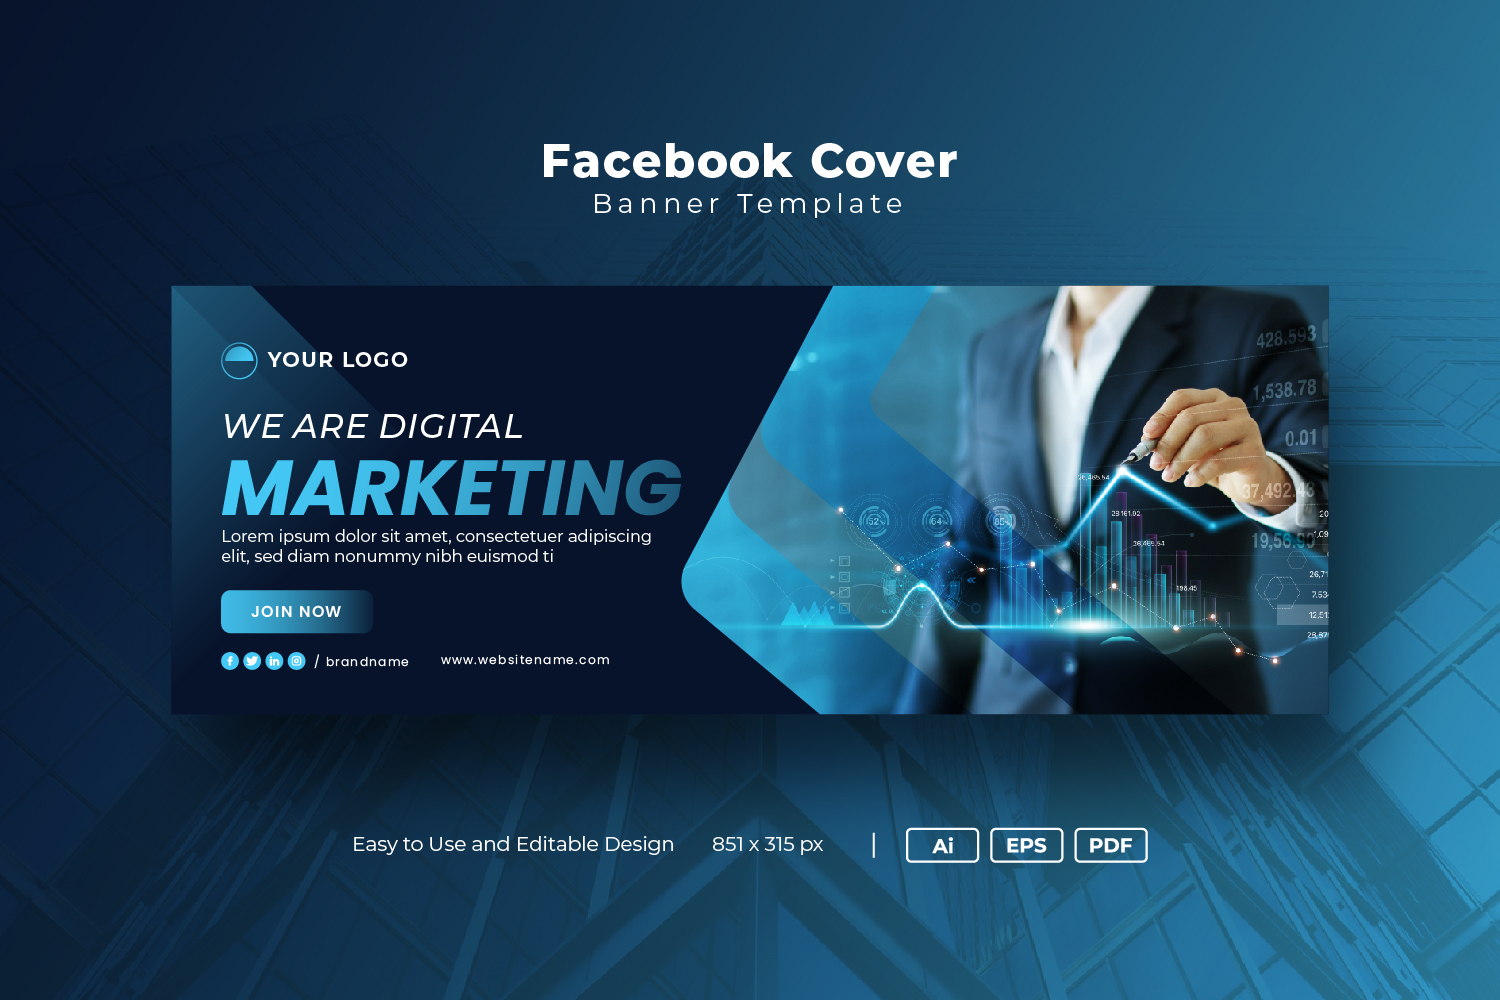 Facebook Cover Template For Digital Marketing Business